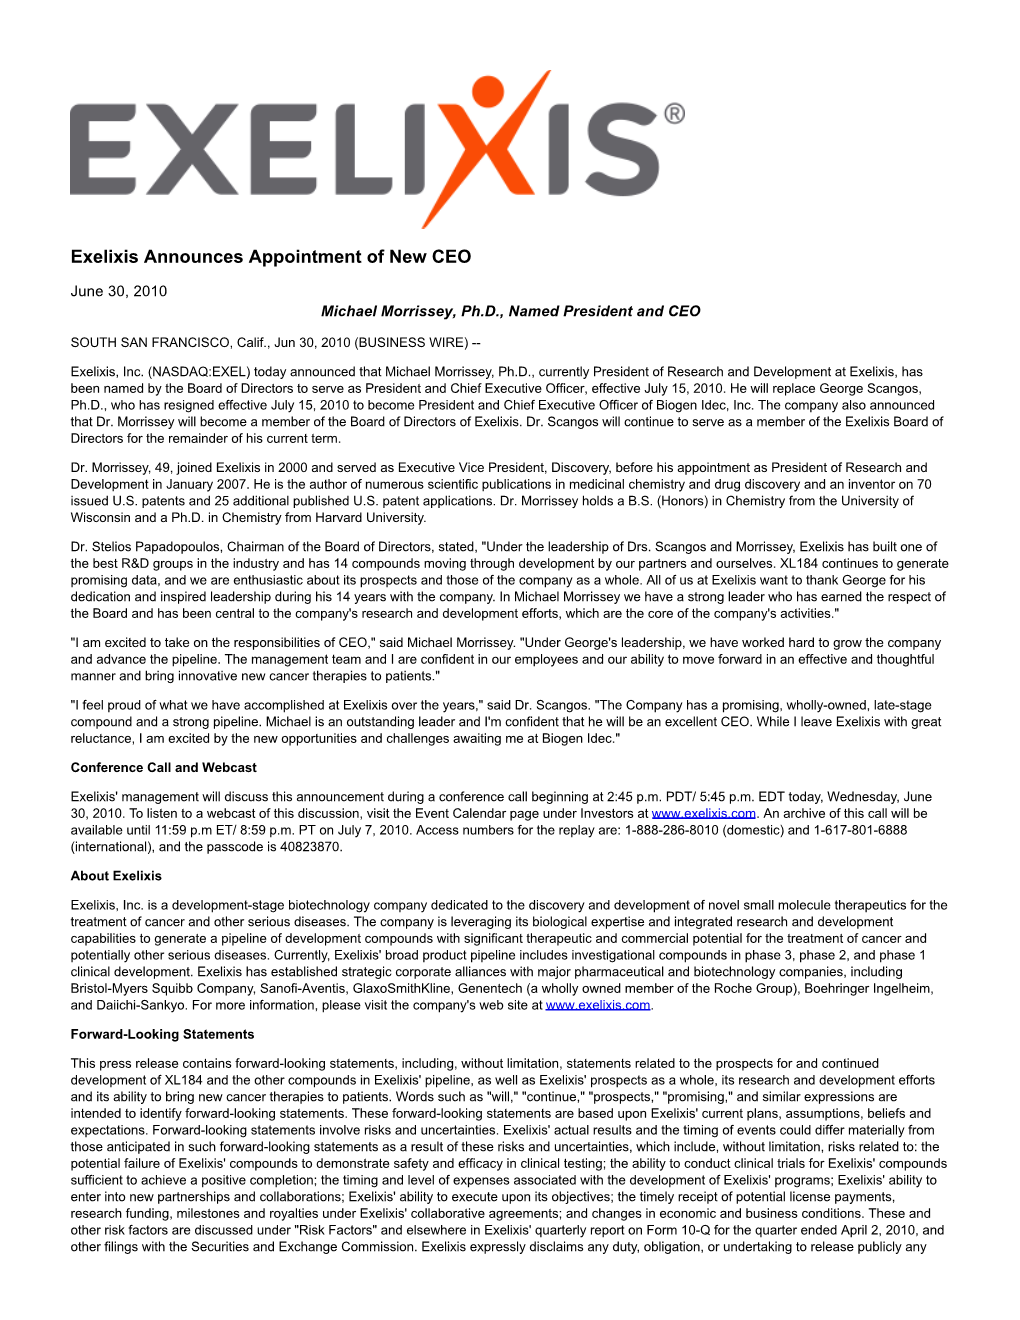 Exelixis Announces Appointment of New CEO